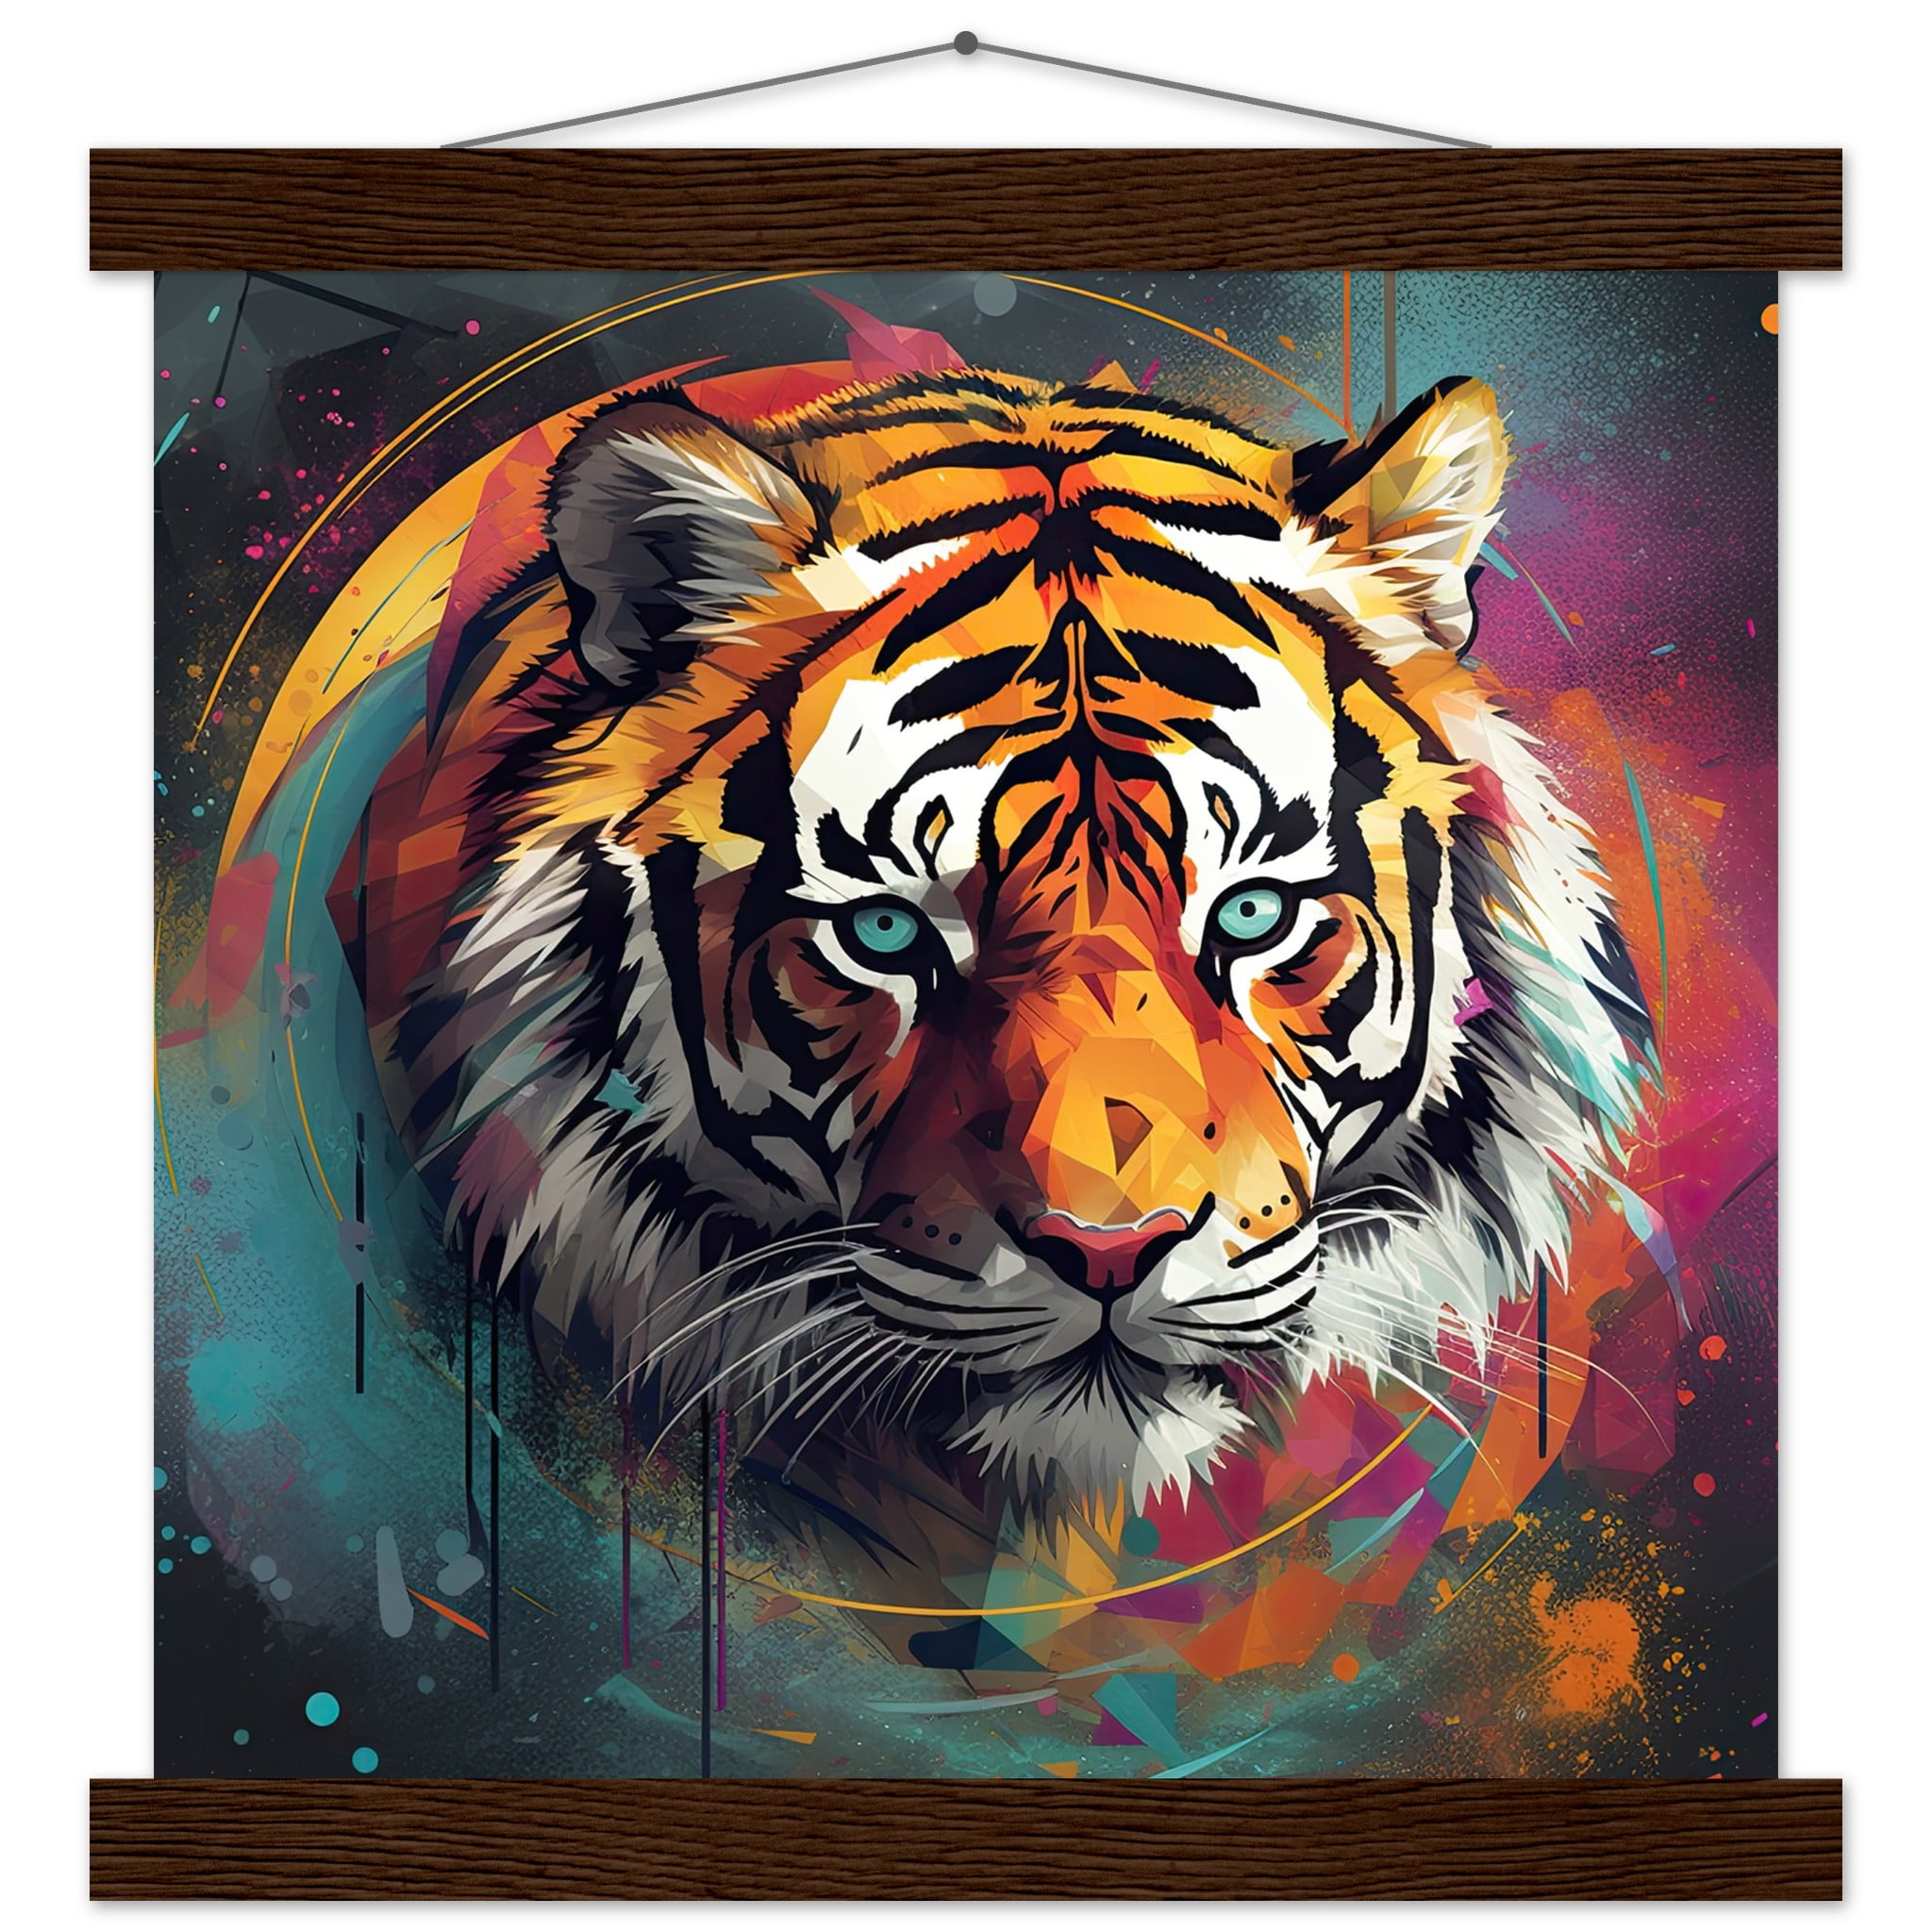 Tiger Colorful Abstract Art Print with Hanger – 30×30 cm / 12×12″, Dark wood wall hanger